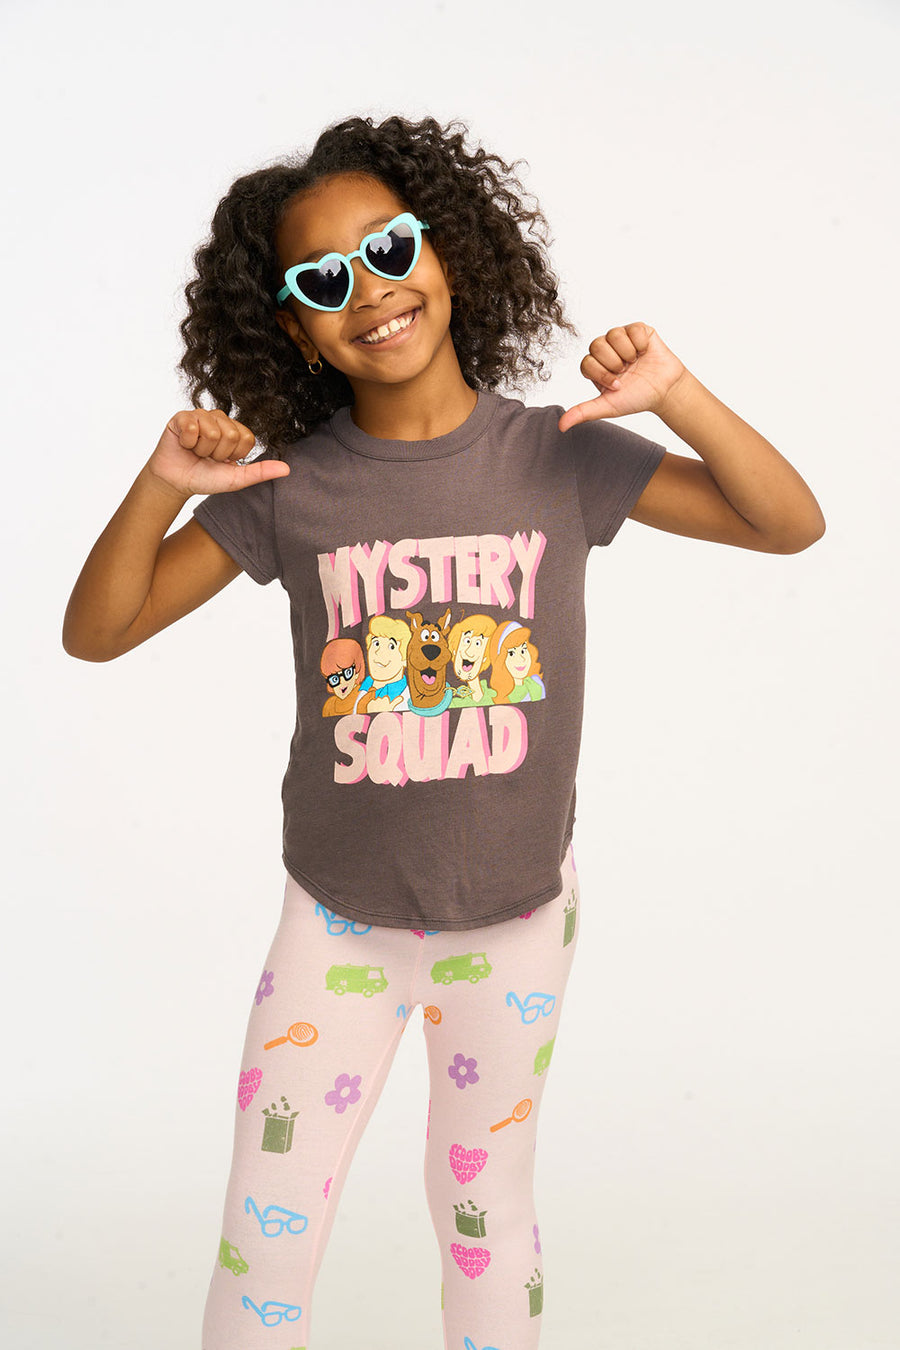 Scooby Doo Mystery Squad Tee GIRLS chaserbrand